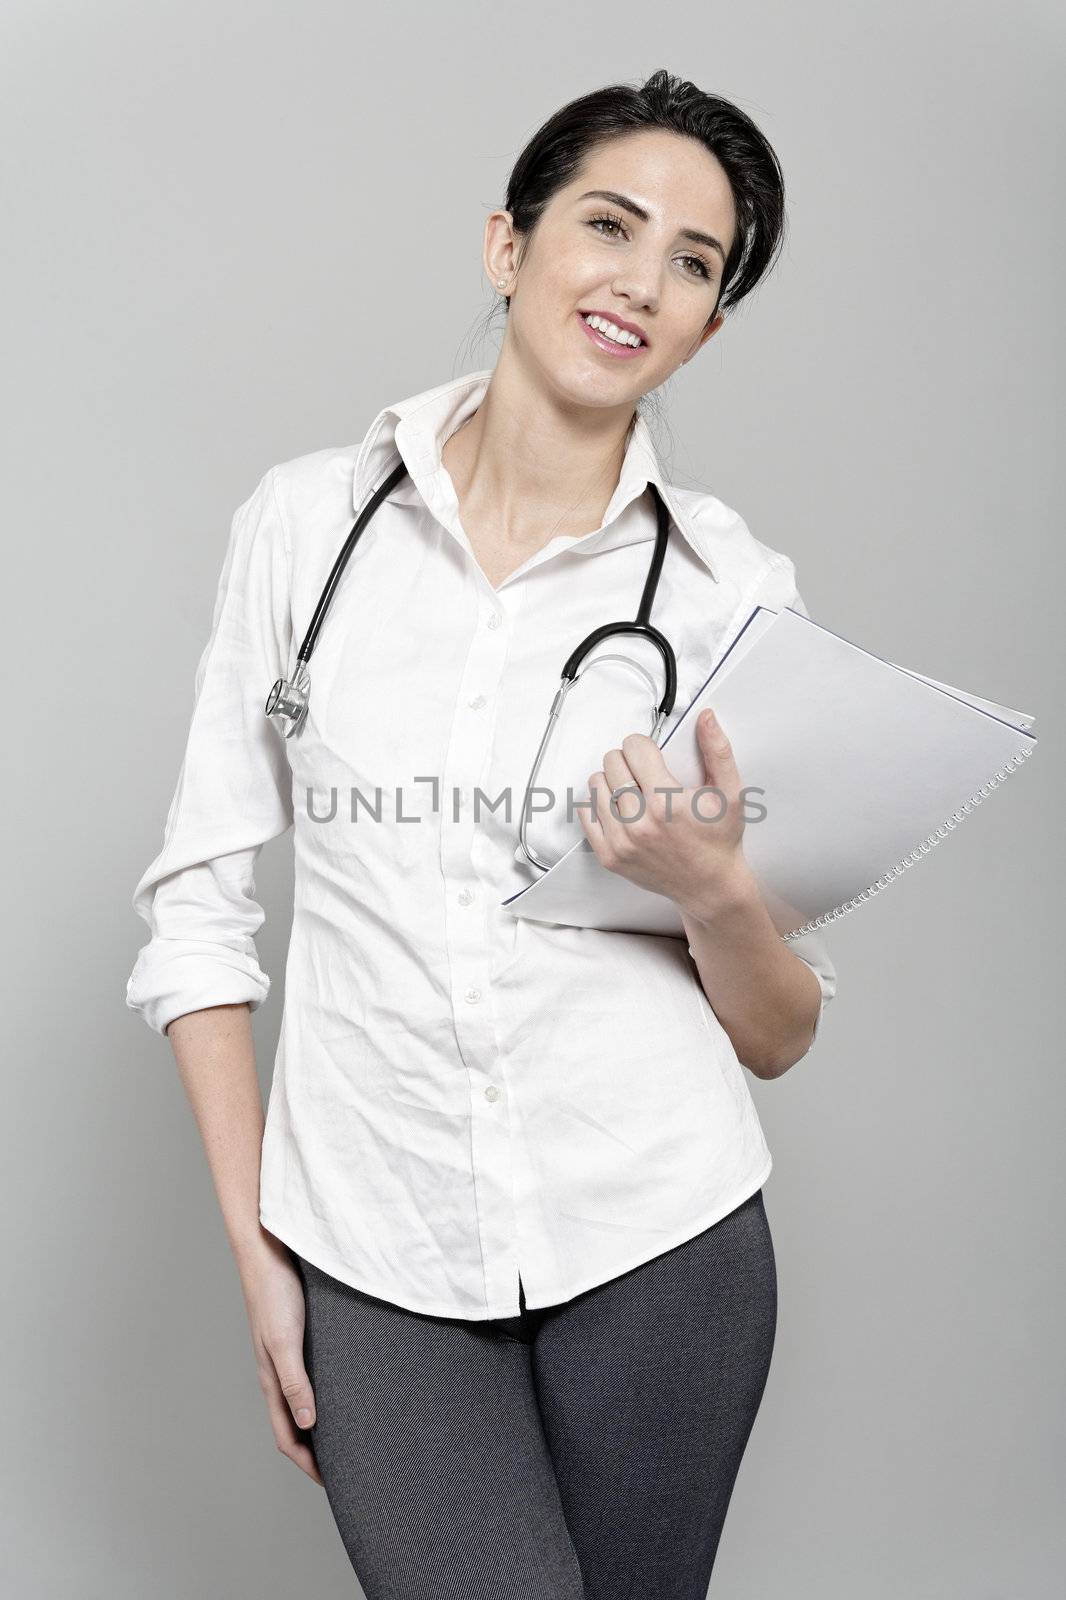 Beautiful young doctor standing with stethoscope